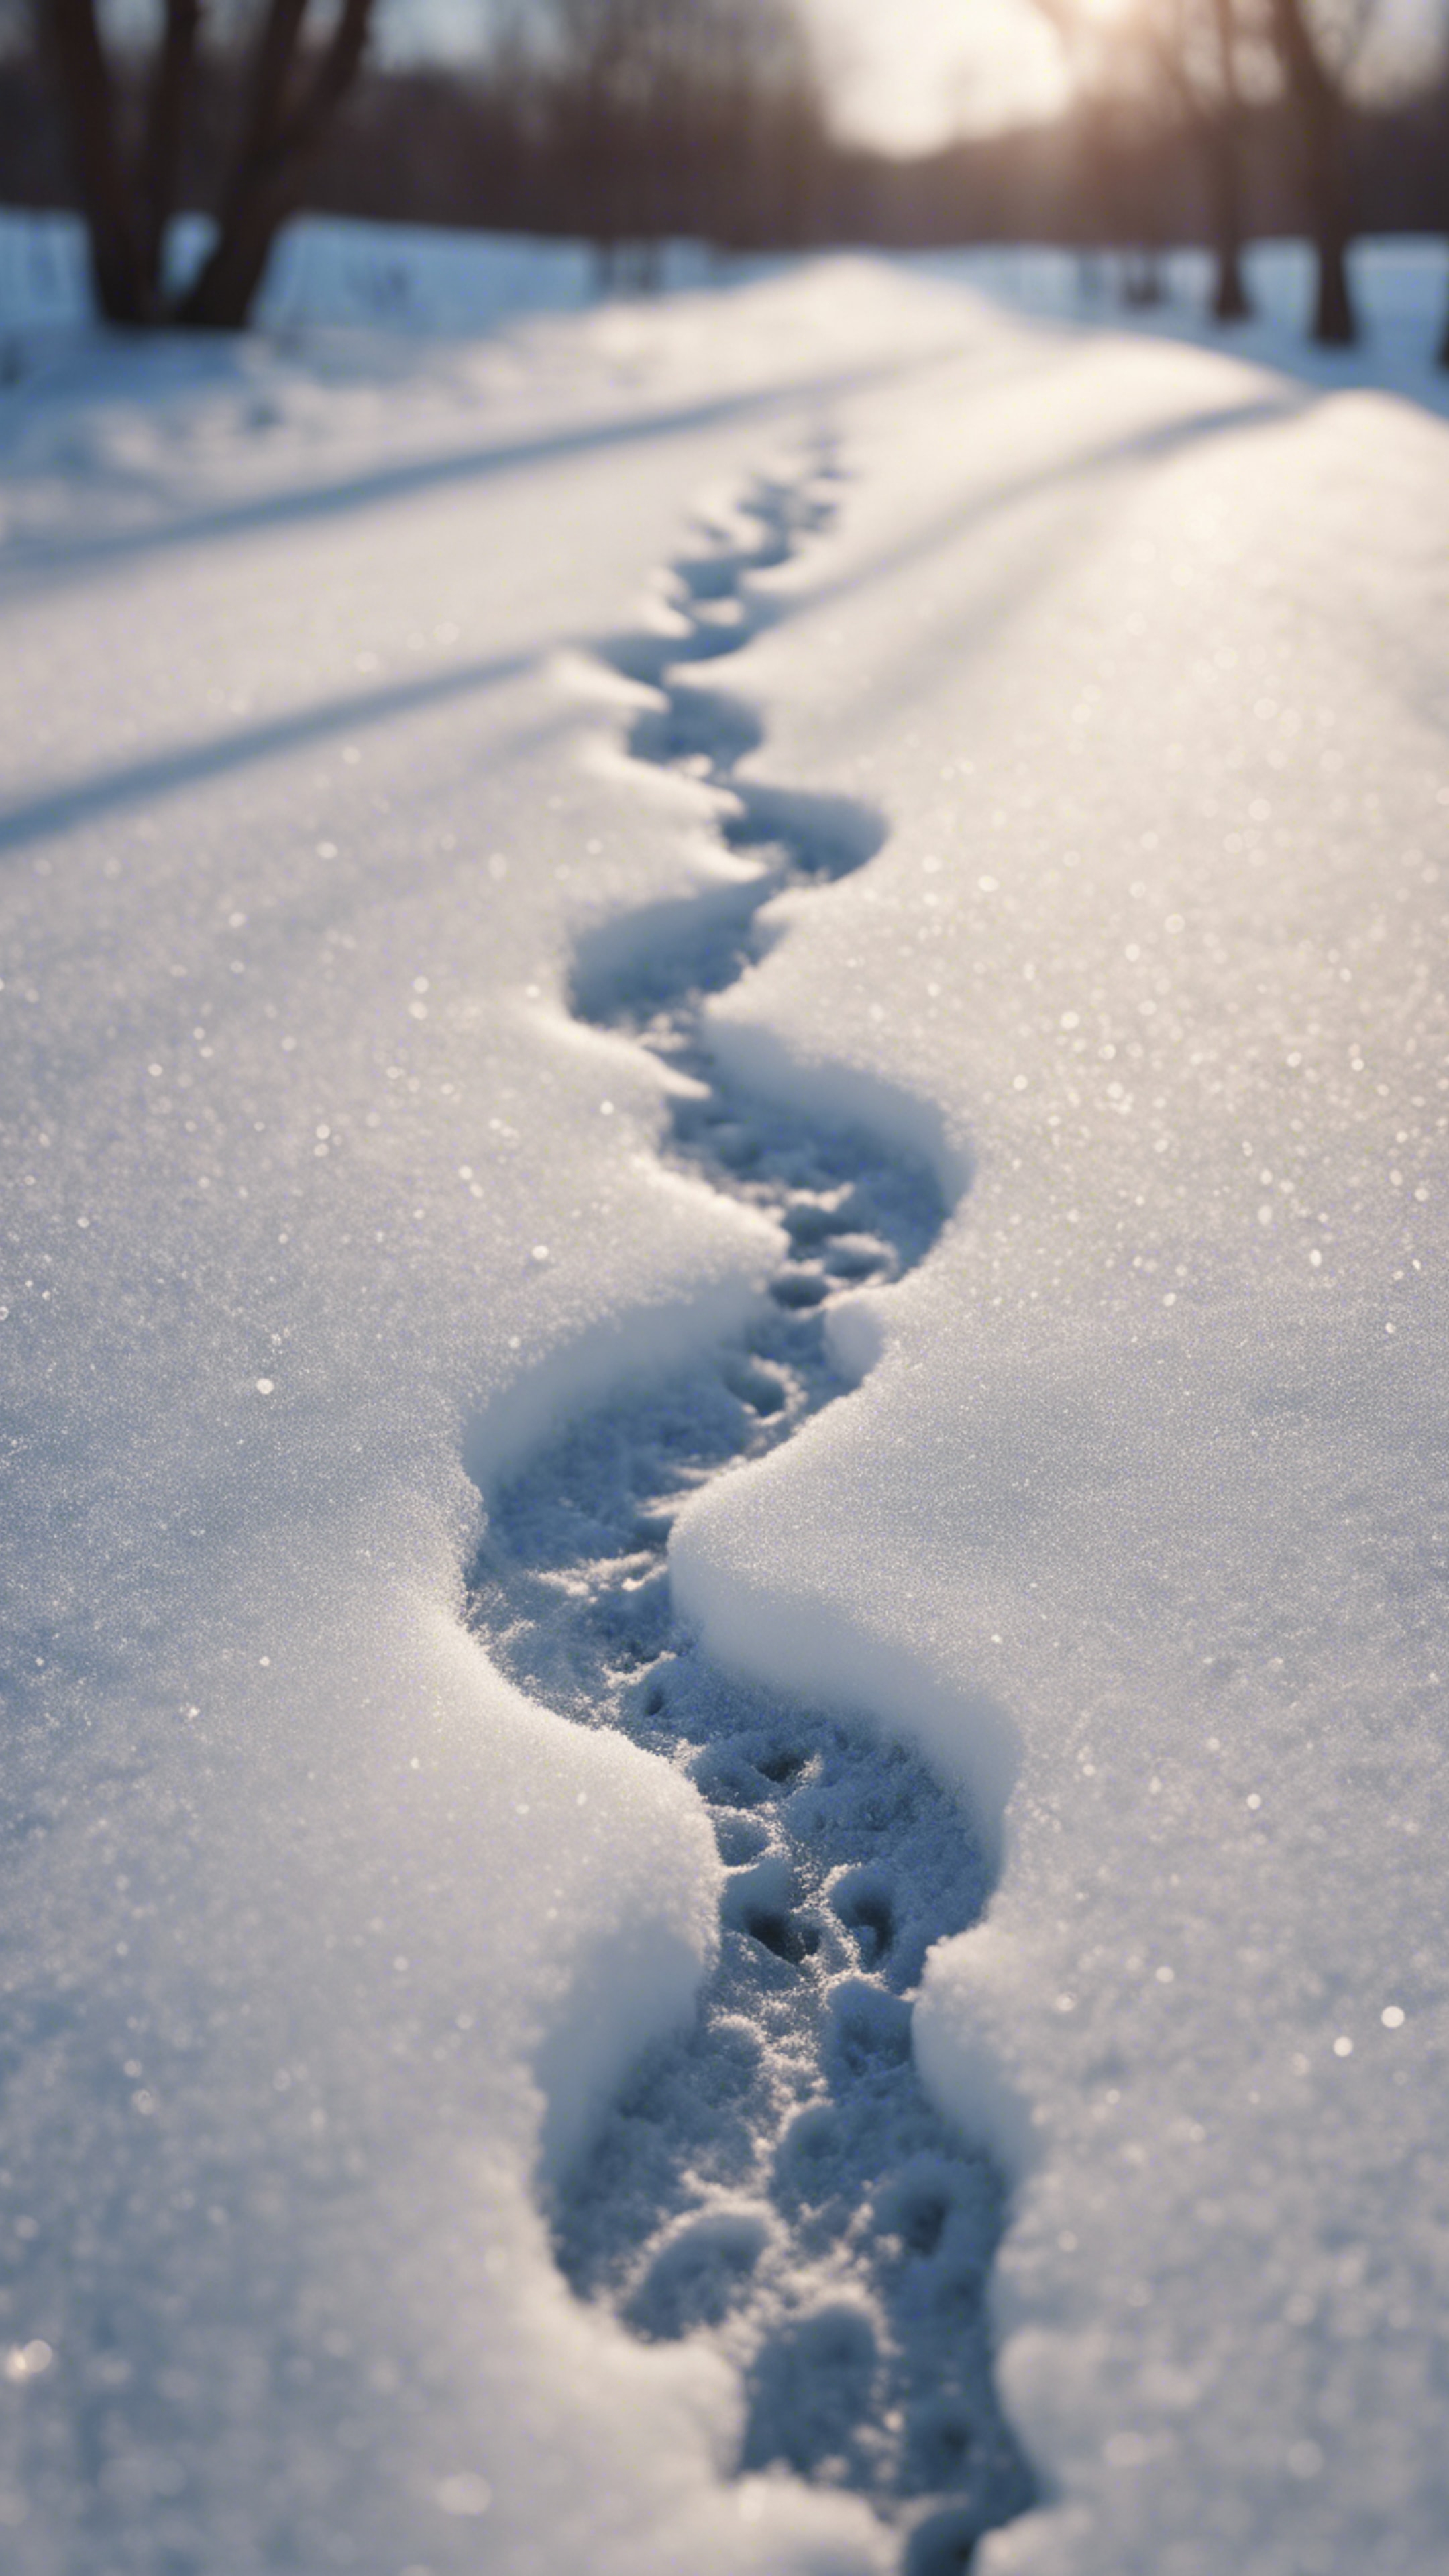 A pair of frosty, heart-shaped footprints imprinted on a snow-covered lane, symbolizing love in winter. Hình nền[a9223da6c59742c6a00f]